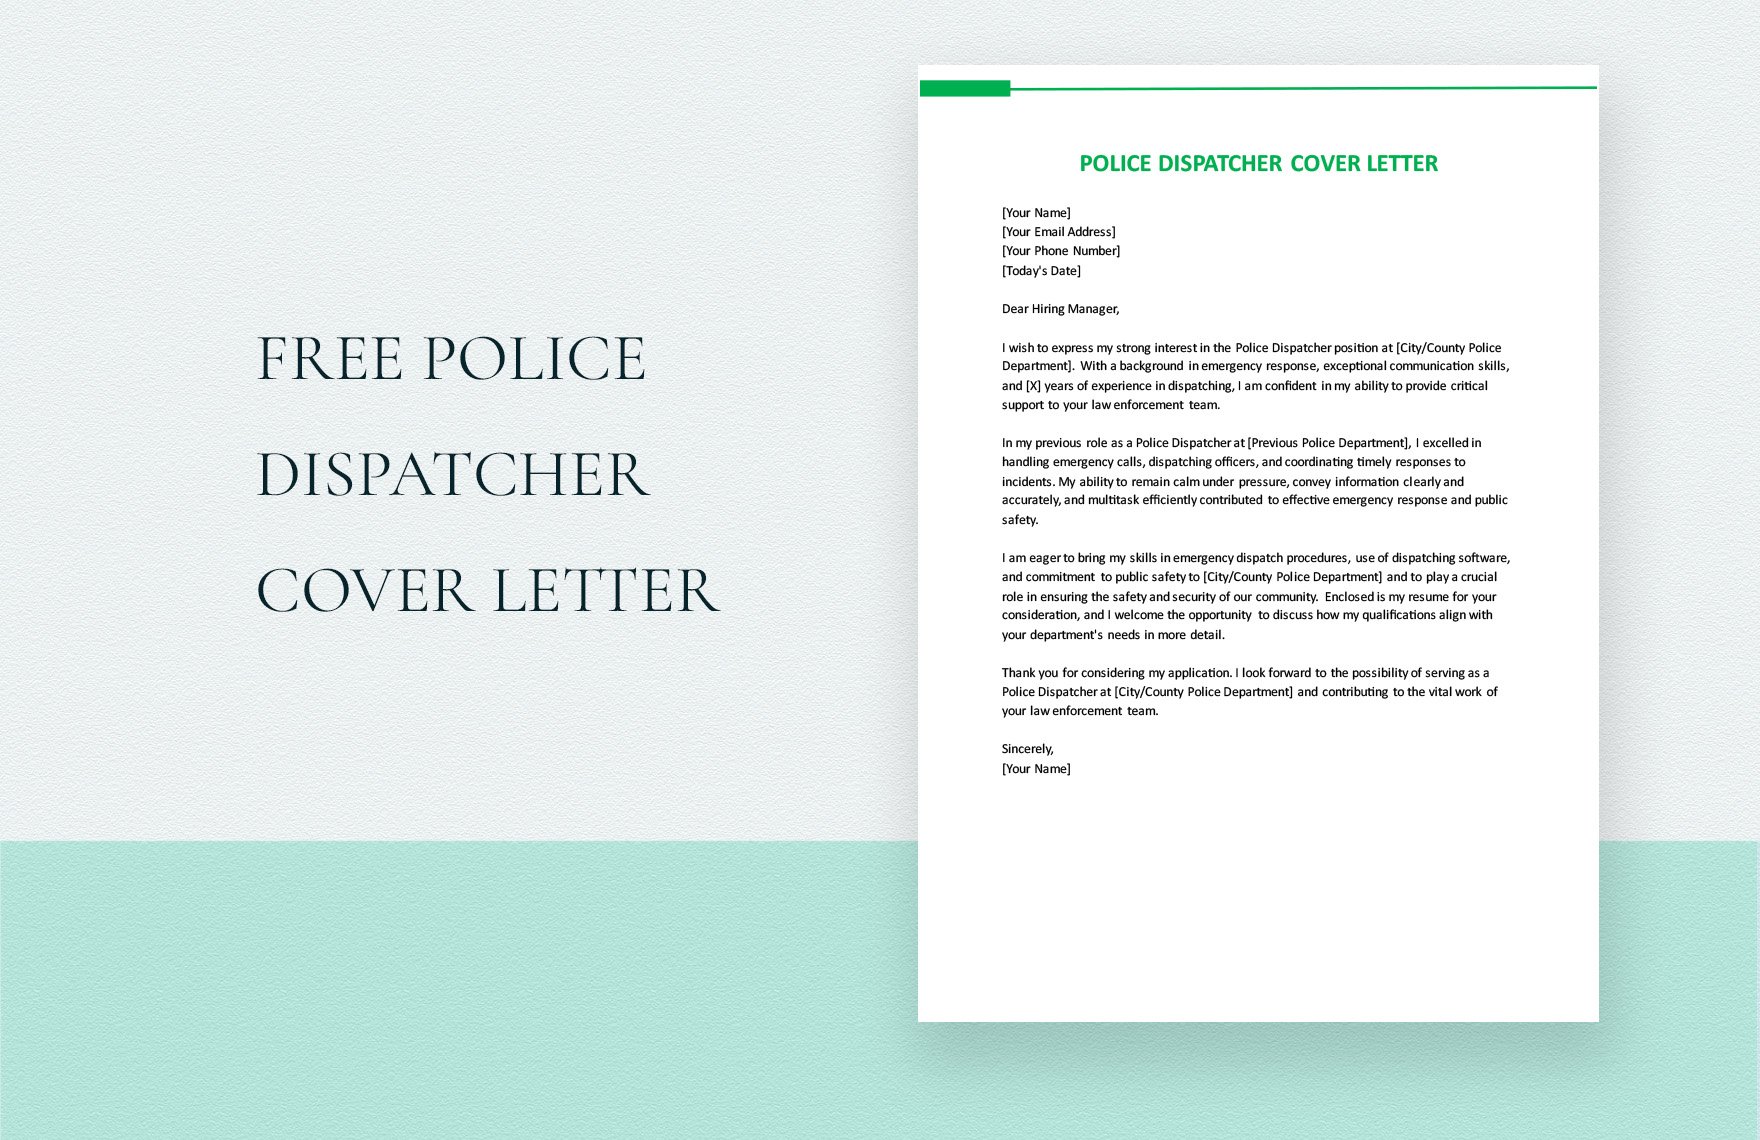 Police Dispatcher Cover Letter